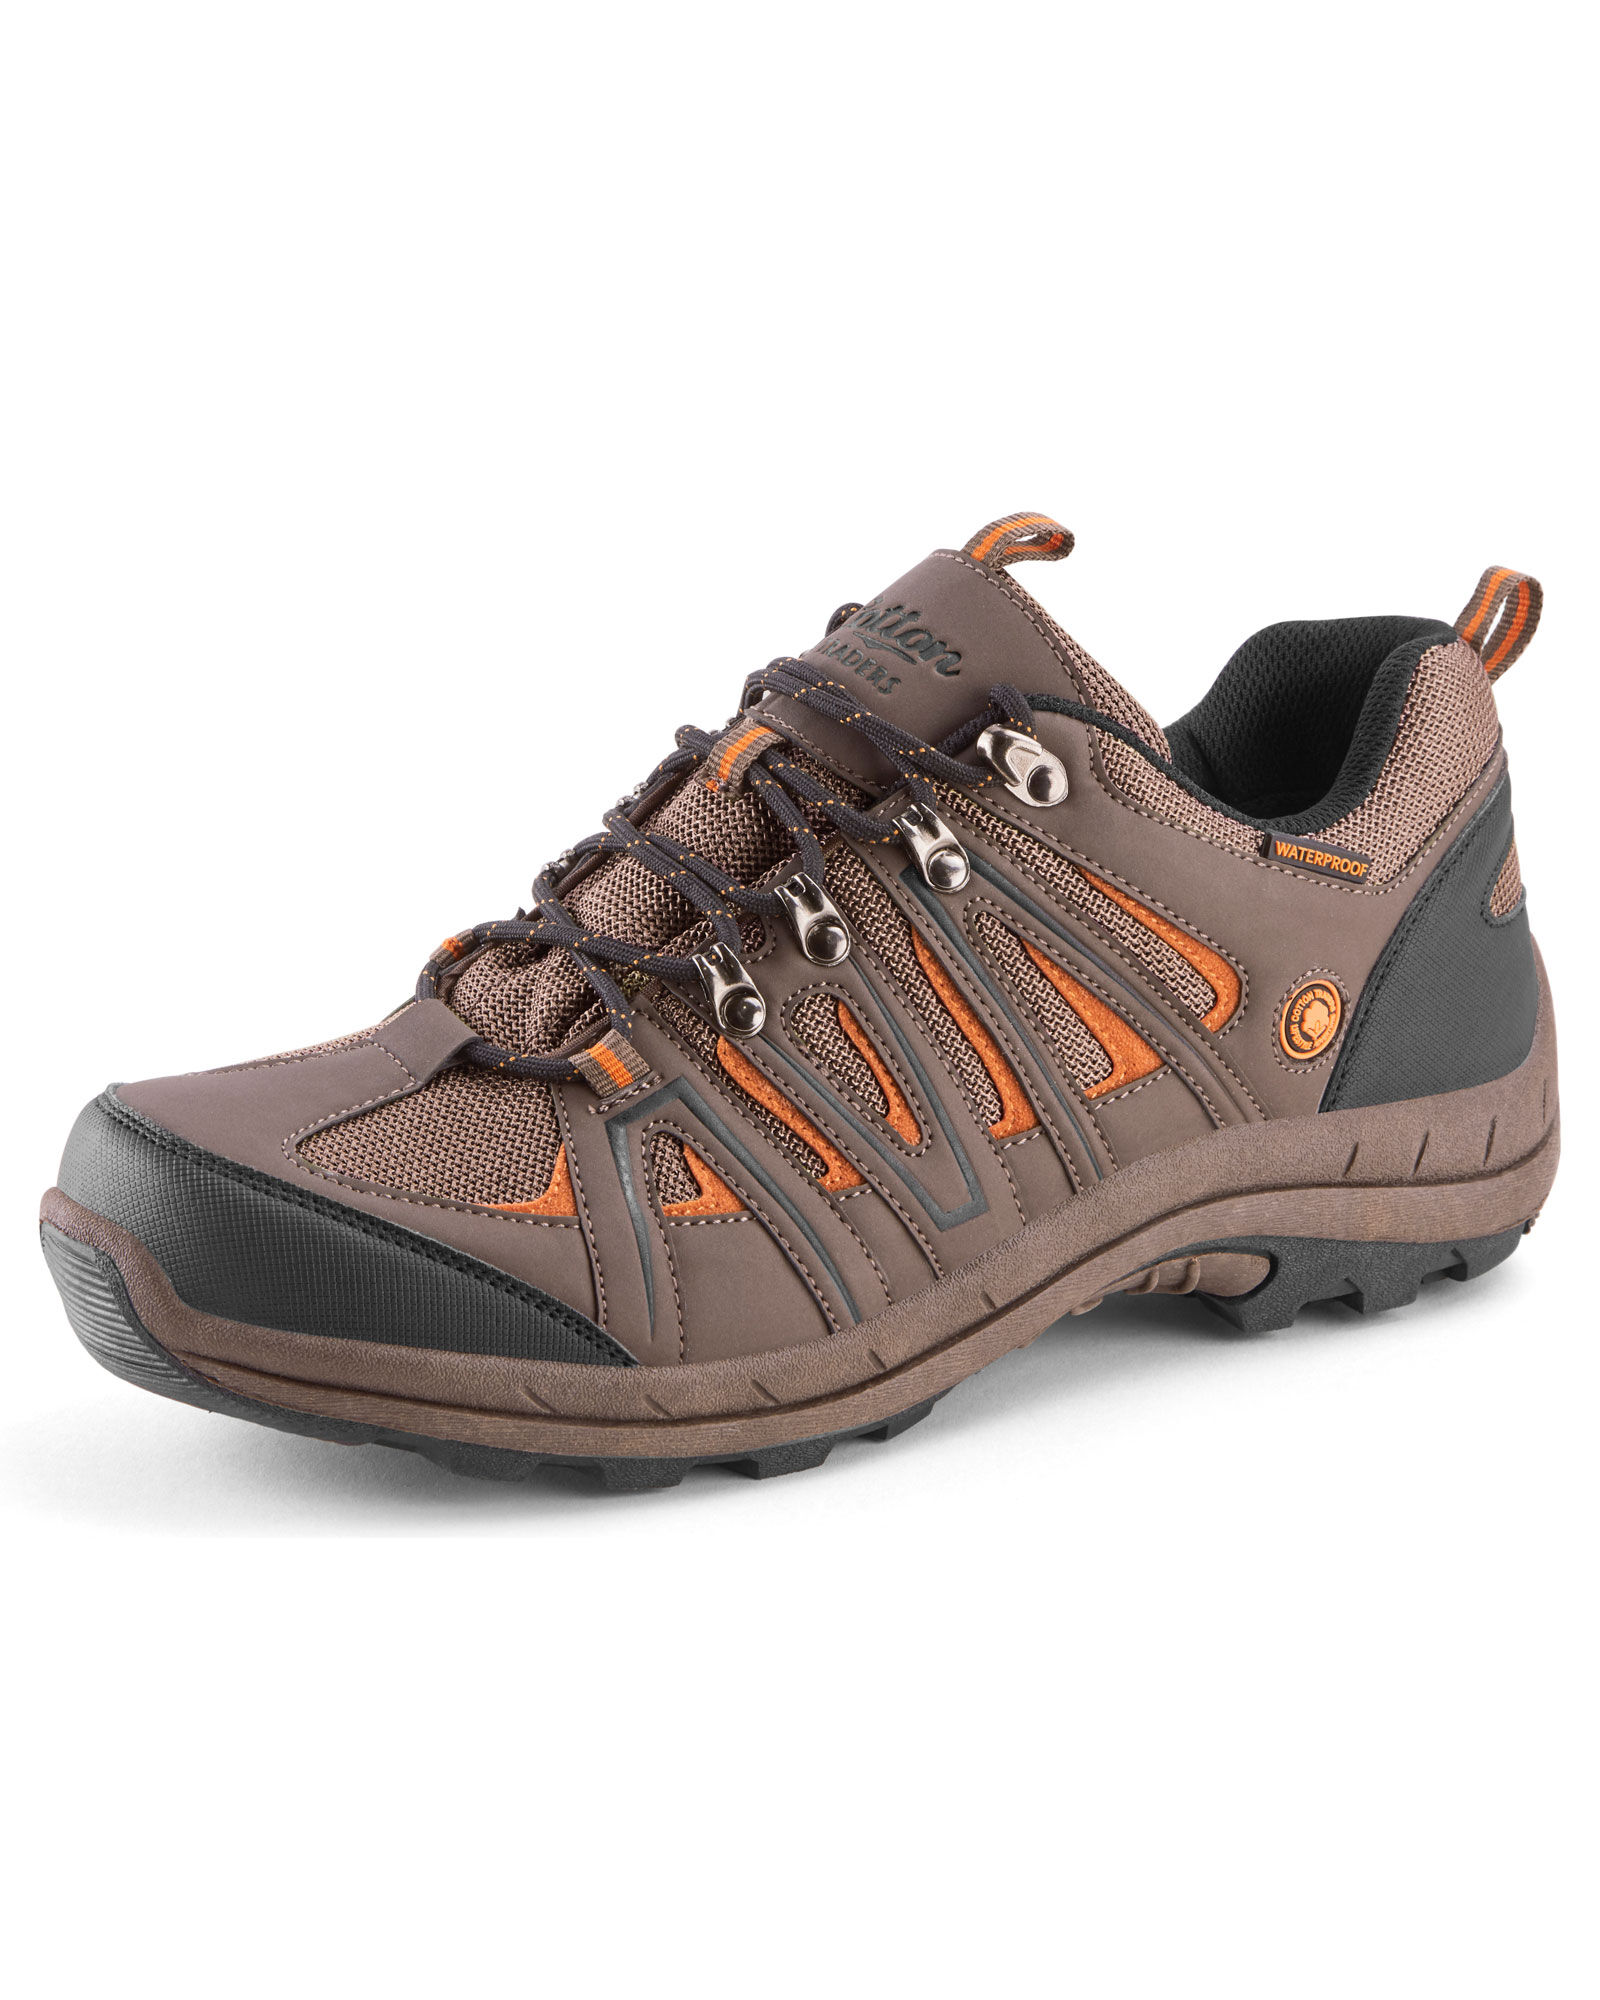 cotton traders waterproof shoes